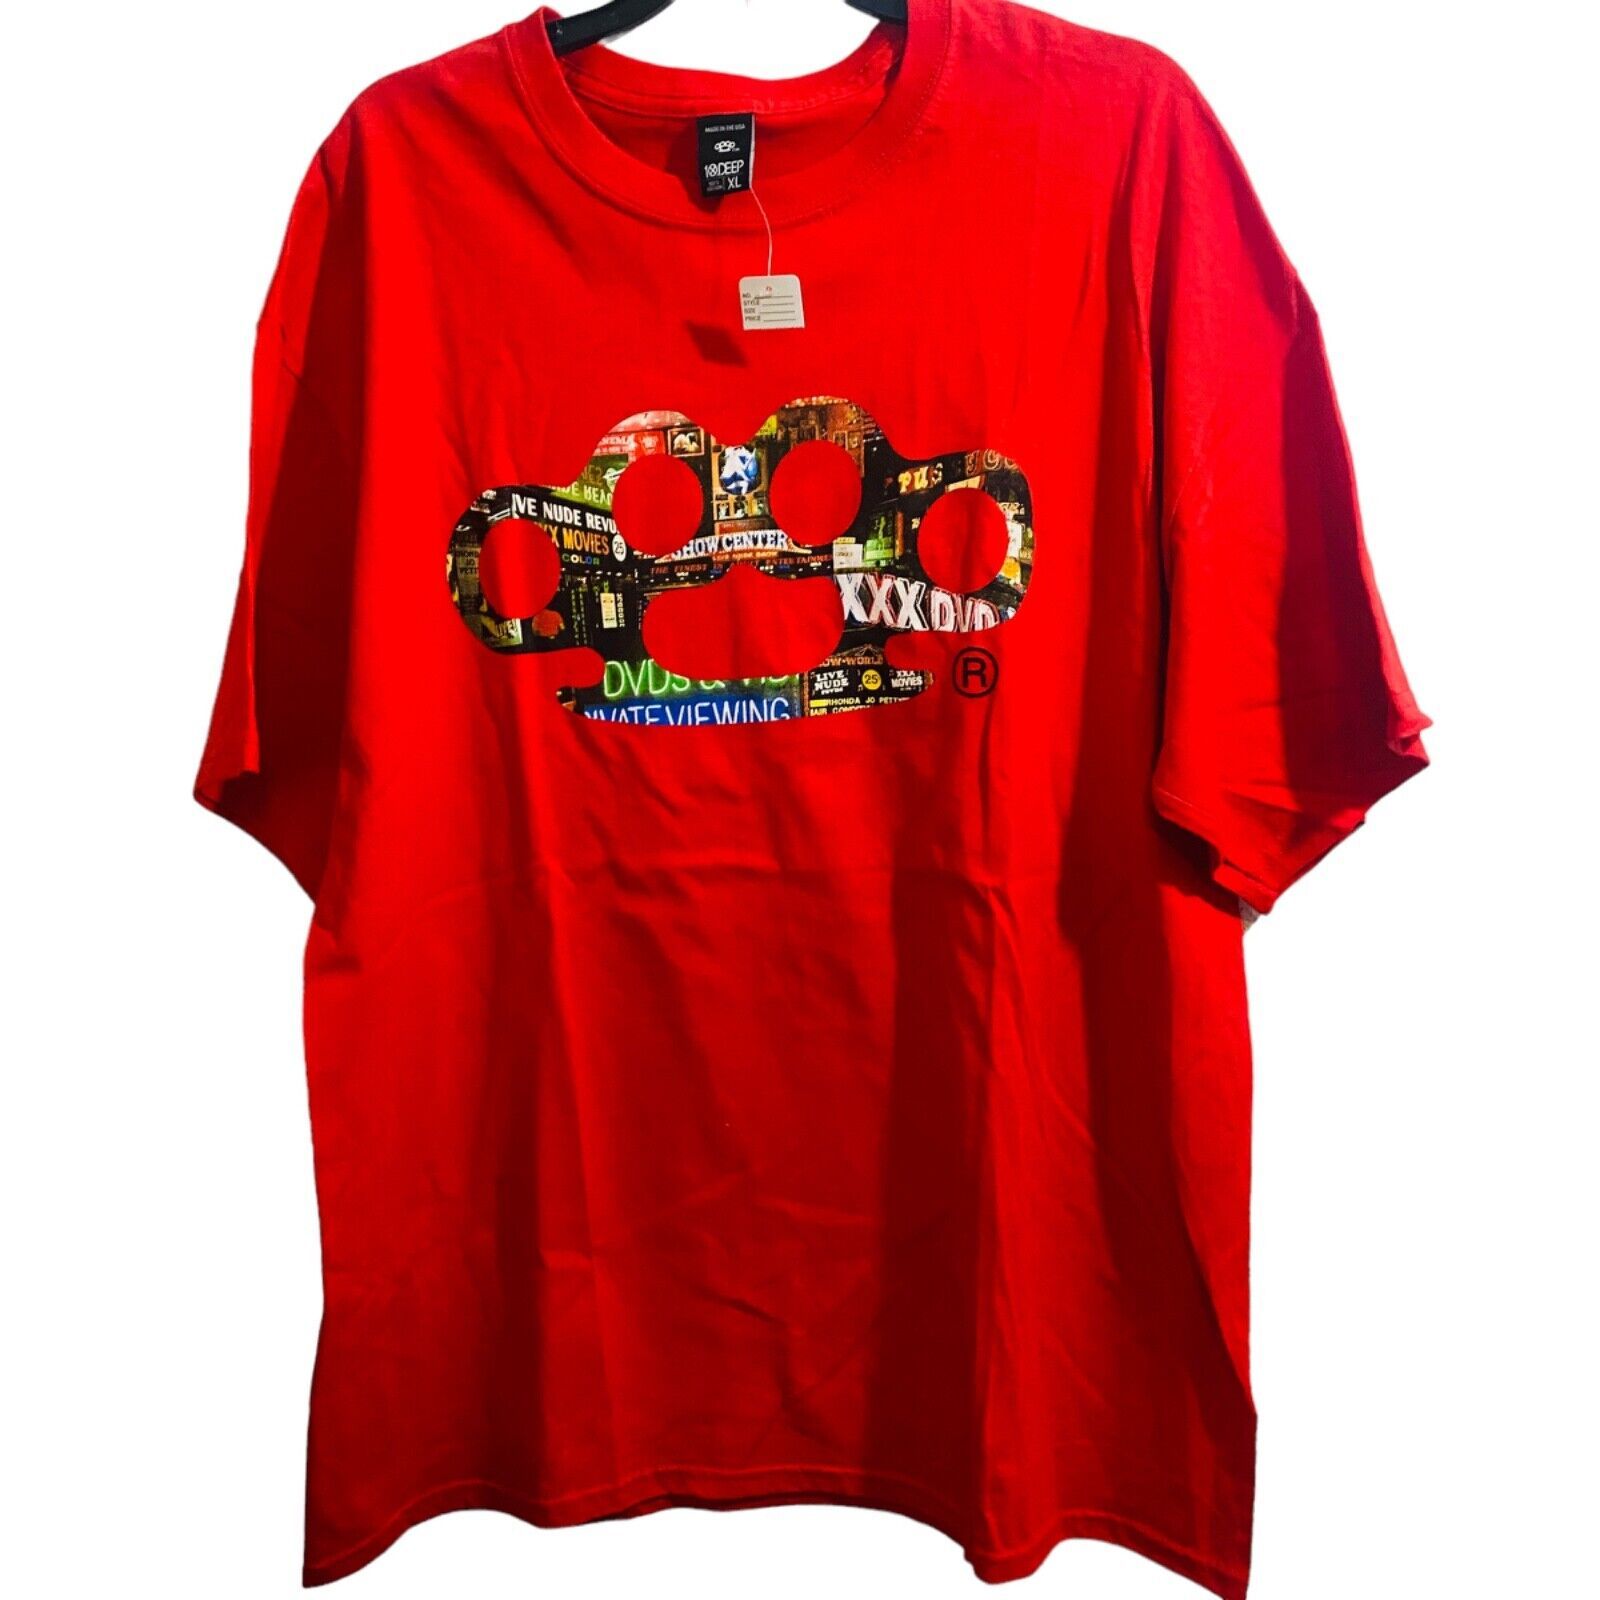 Primary image for NEW 10.Deep Red T-shirt Tee Shirt XL  New York Scene on  Brass Knuckle